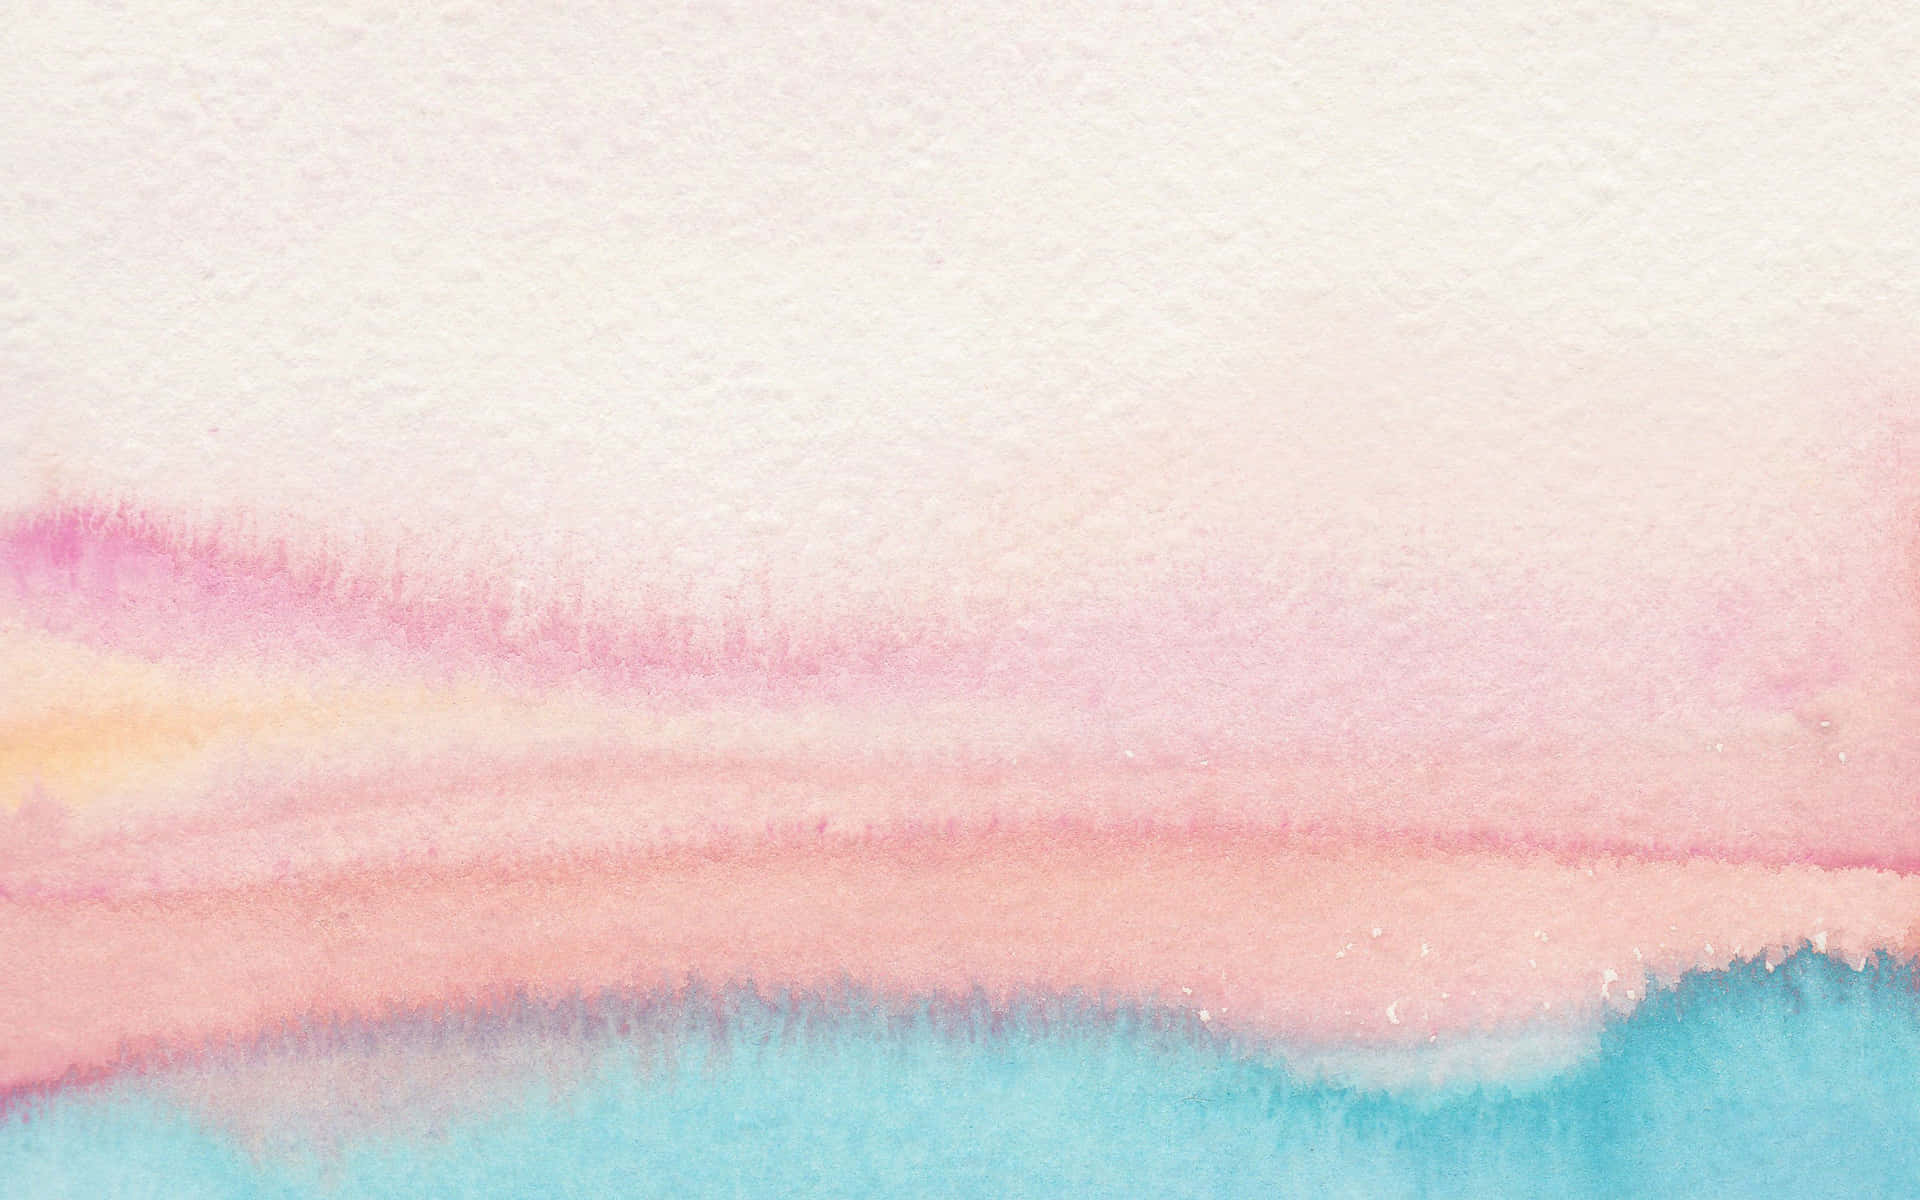 Watercolor Background Images  Free Download on Freepik